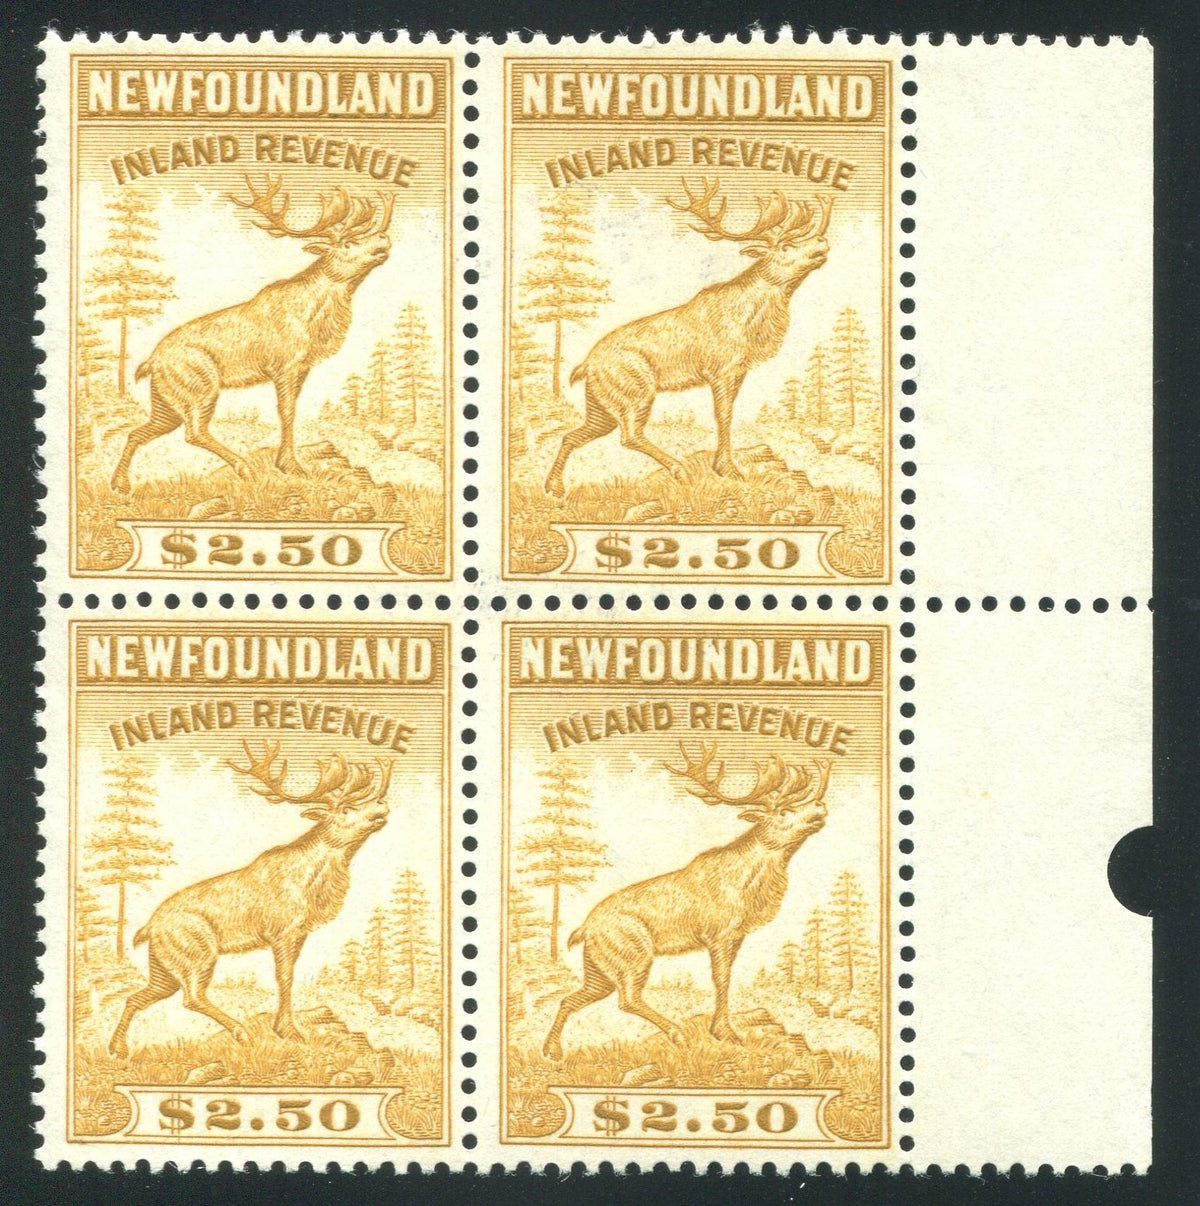 0051NF1708 - NFR51 - Mint Block of 4